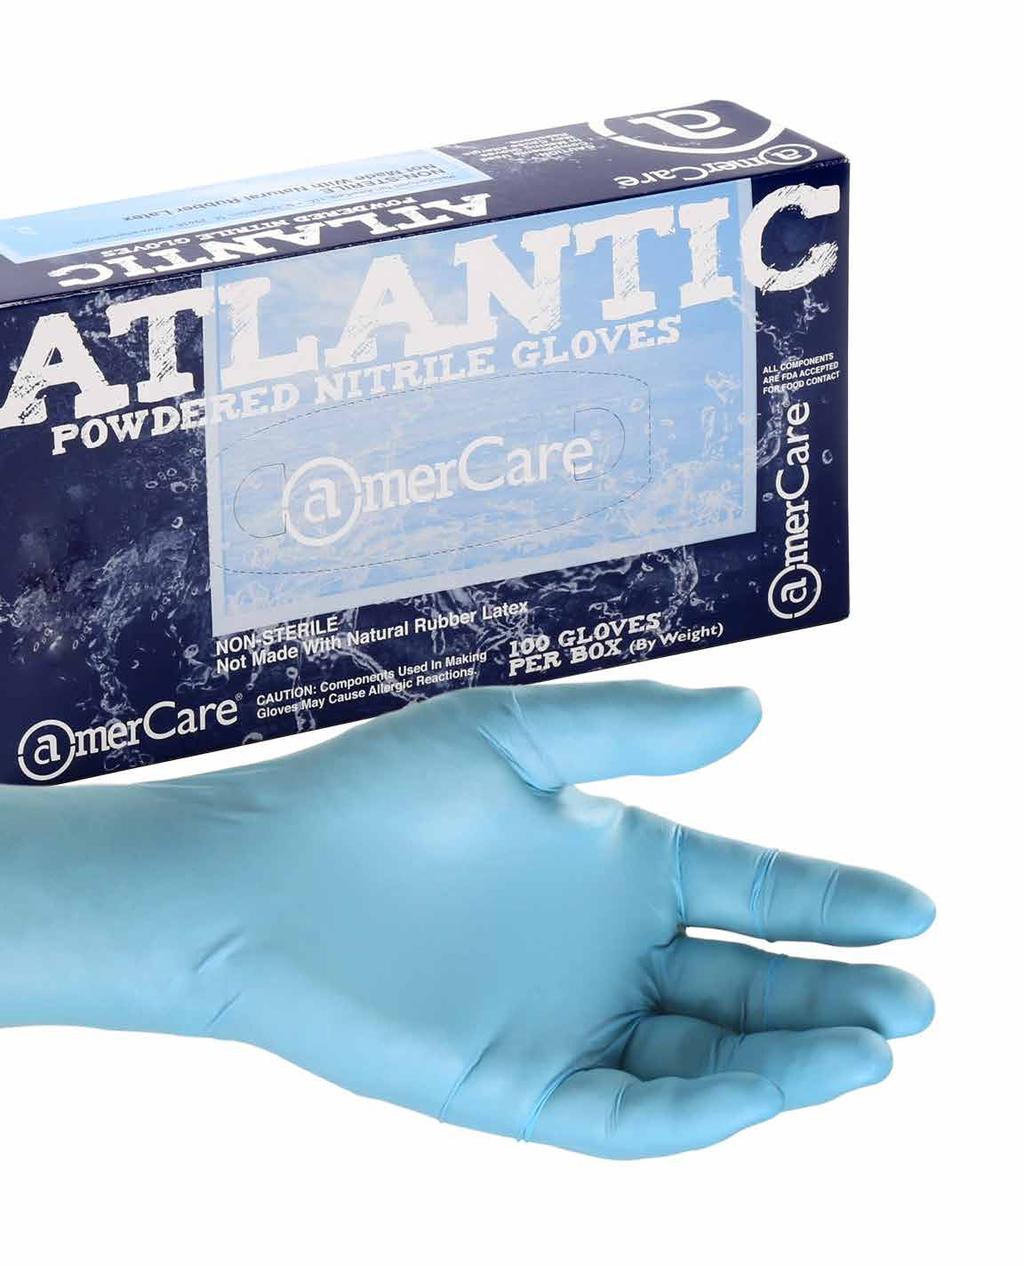 Very good quality and fits my hands perfectly. - Peter Atlantic Nitrile Gloves Sizes: S - XL, 1,000 Gloves per Case, $5.79 per Box, Average Thickness: 4.